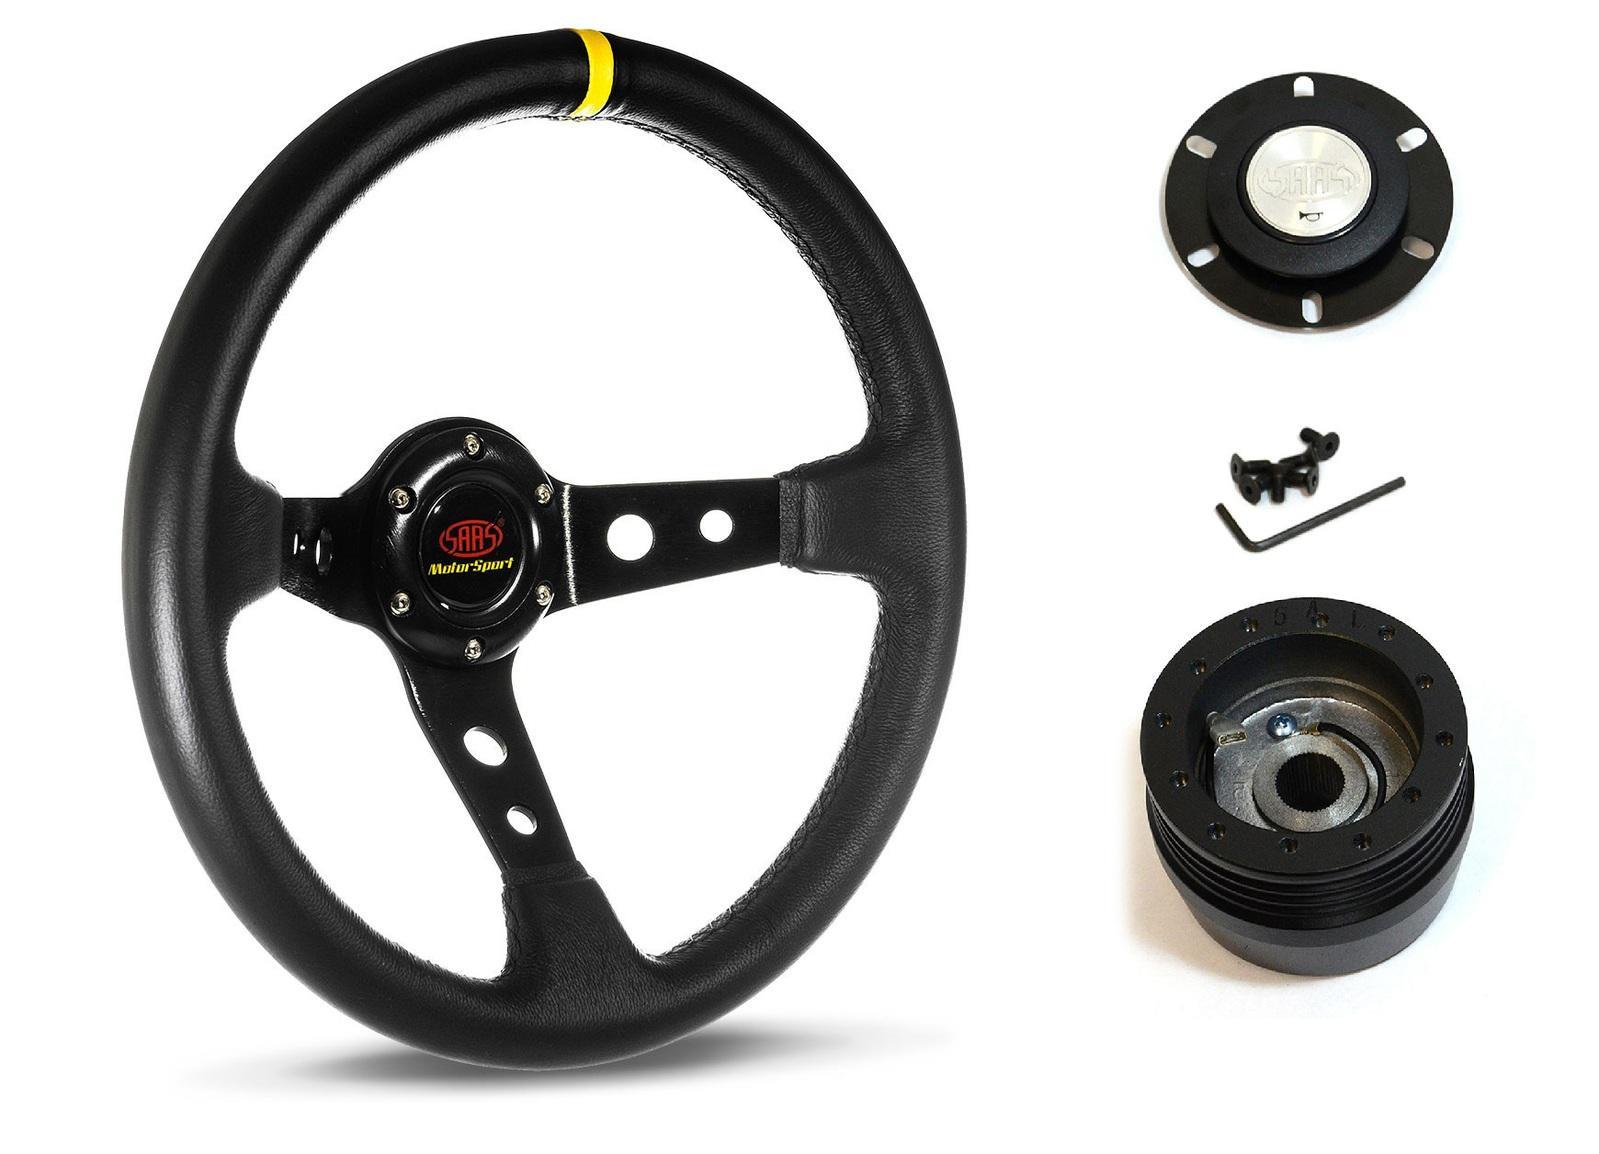 SAAS Steering Wheel Leather 14" ADR GT Deep Dish Black With Holes + Indicat SWGT2 and SAAS boss kit for Ford Corsair All Models 1988-1996